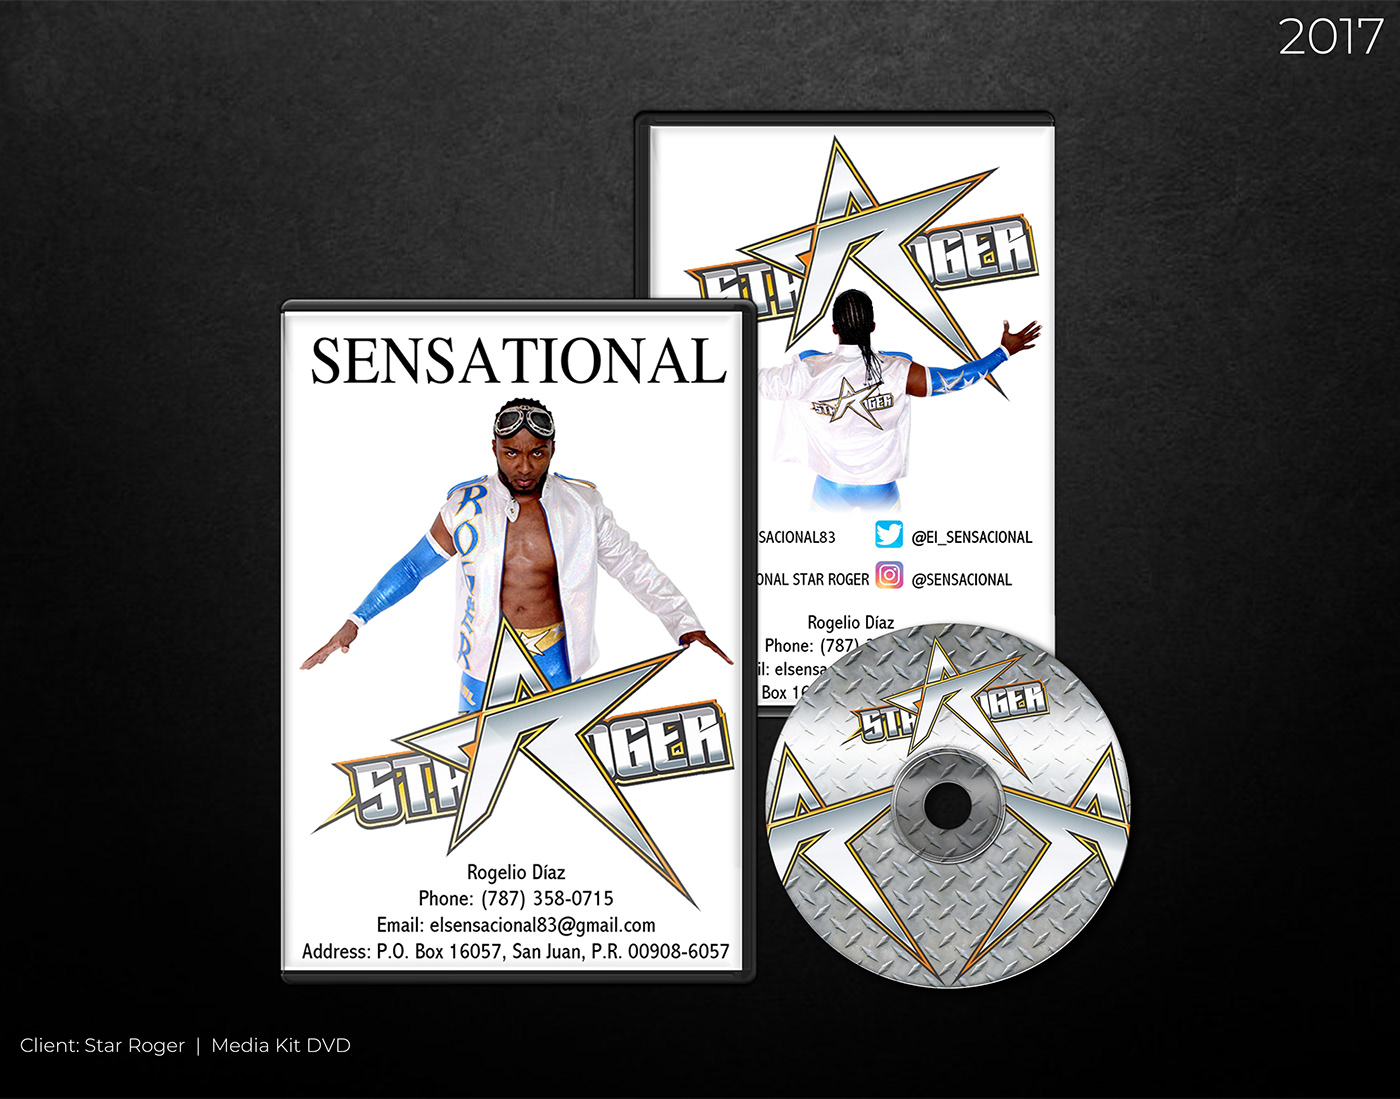 graphic design  Photography  Video Editing Wrestling wedding Quinceanera Media Kit press kit dvd cover DVD